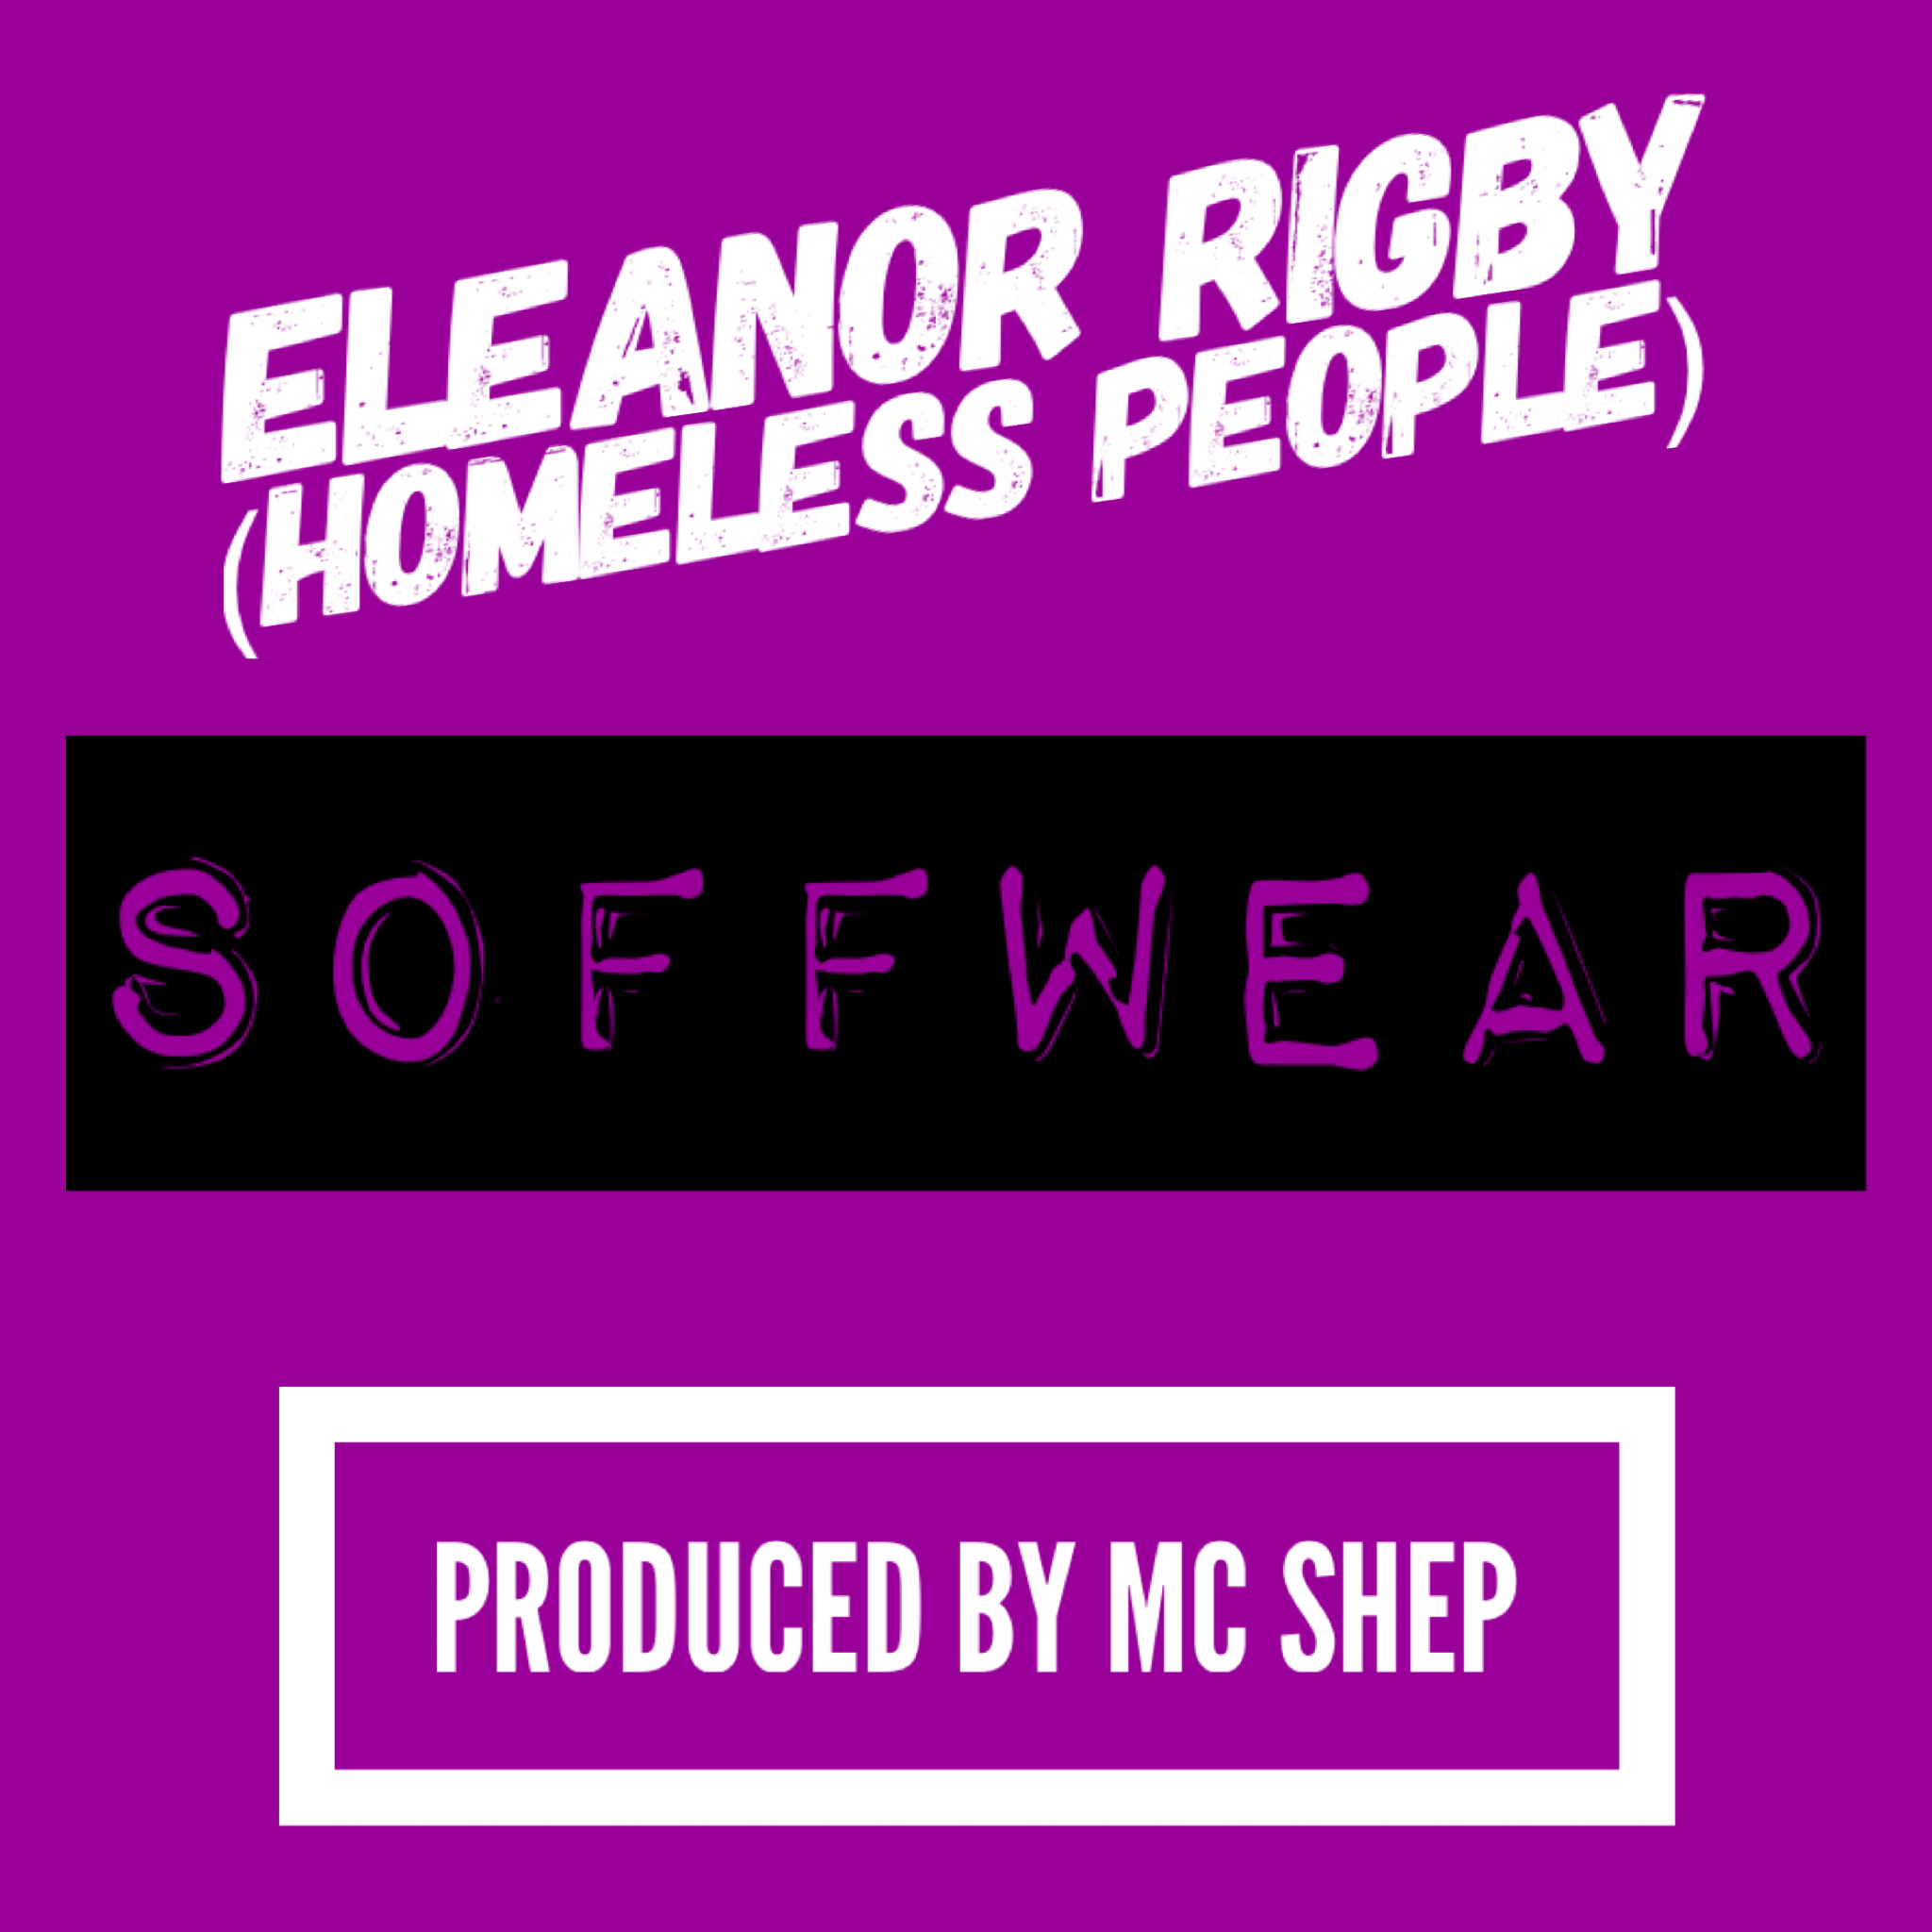 Introducing Soffwear: A Throwback Soul Group led by MC Shep with hot new single ‘Eleanor Rigby (Homeless People)’ on the London FM Digital Playlist now.